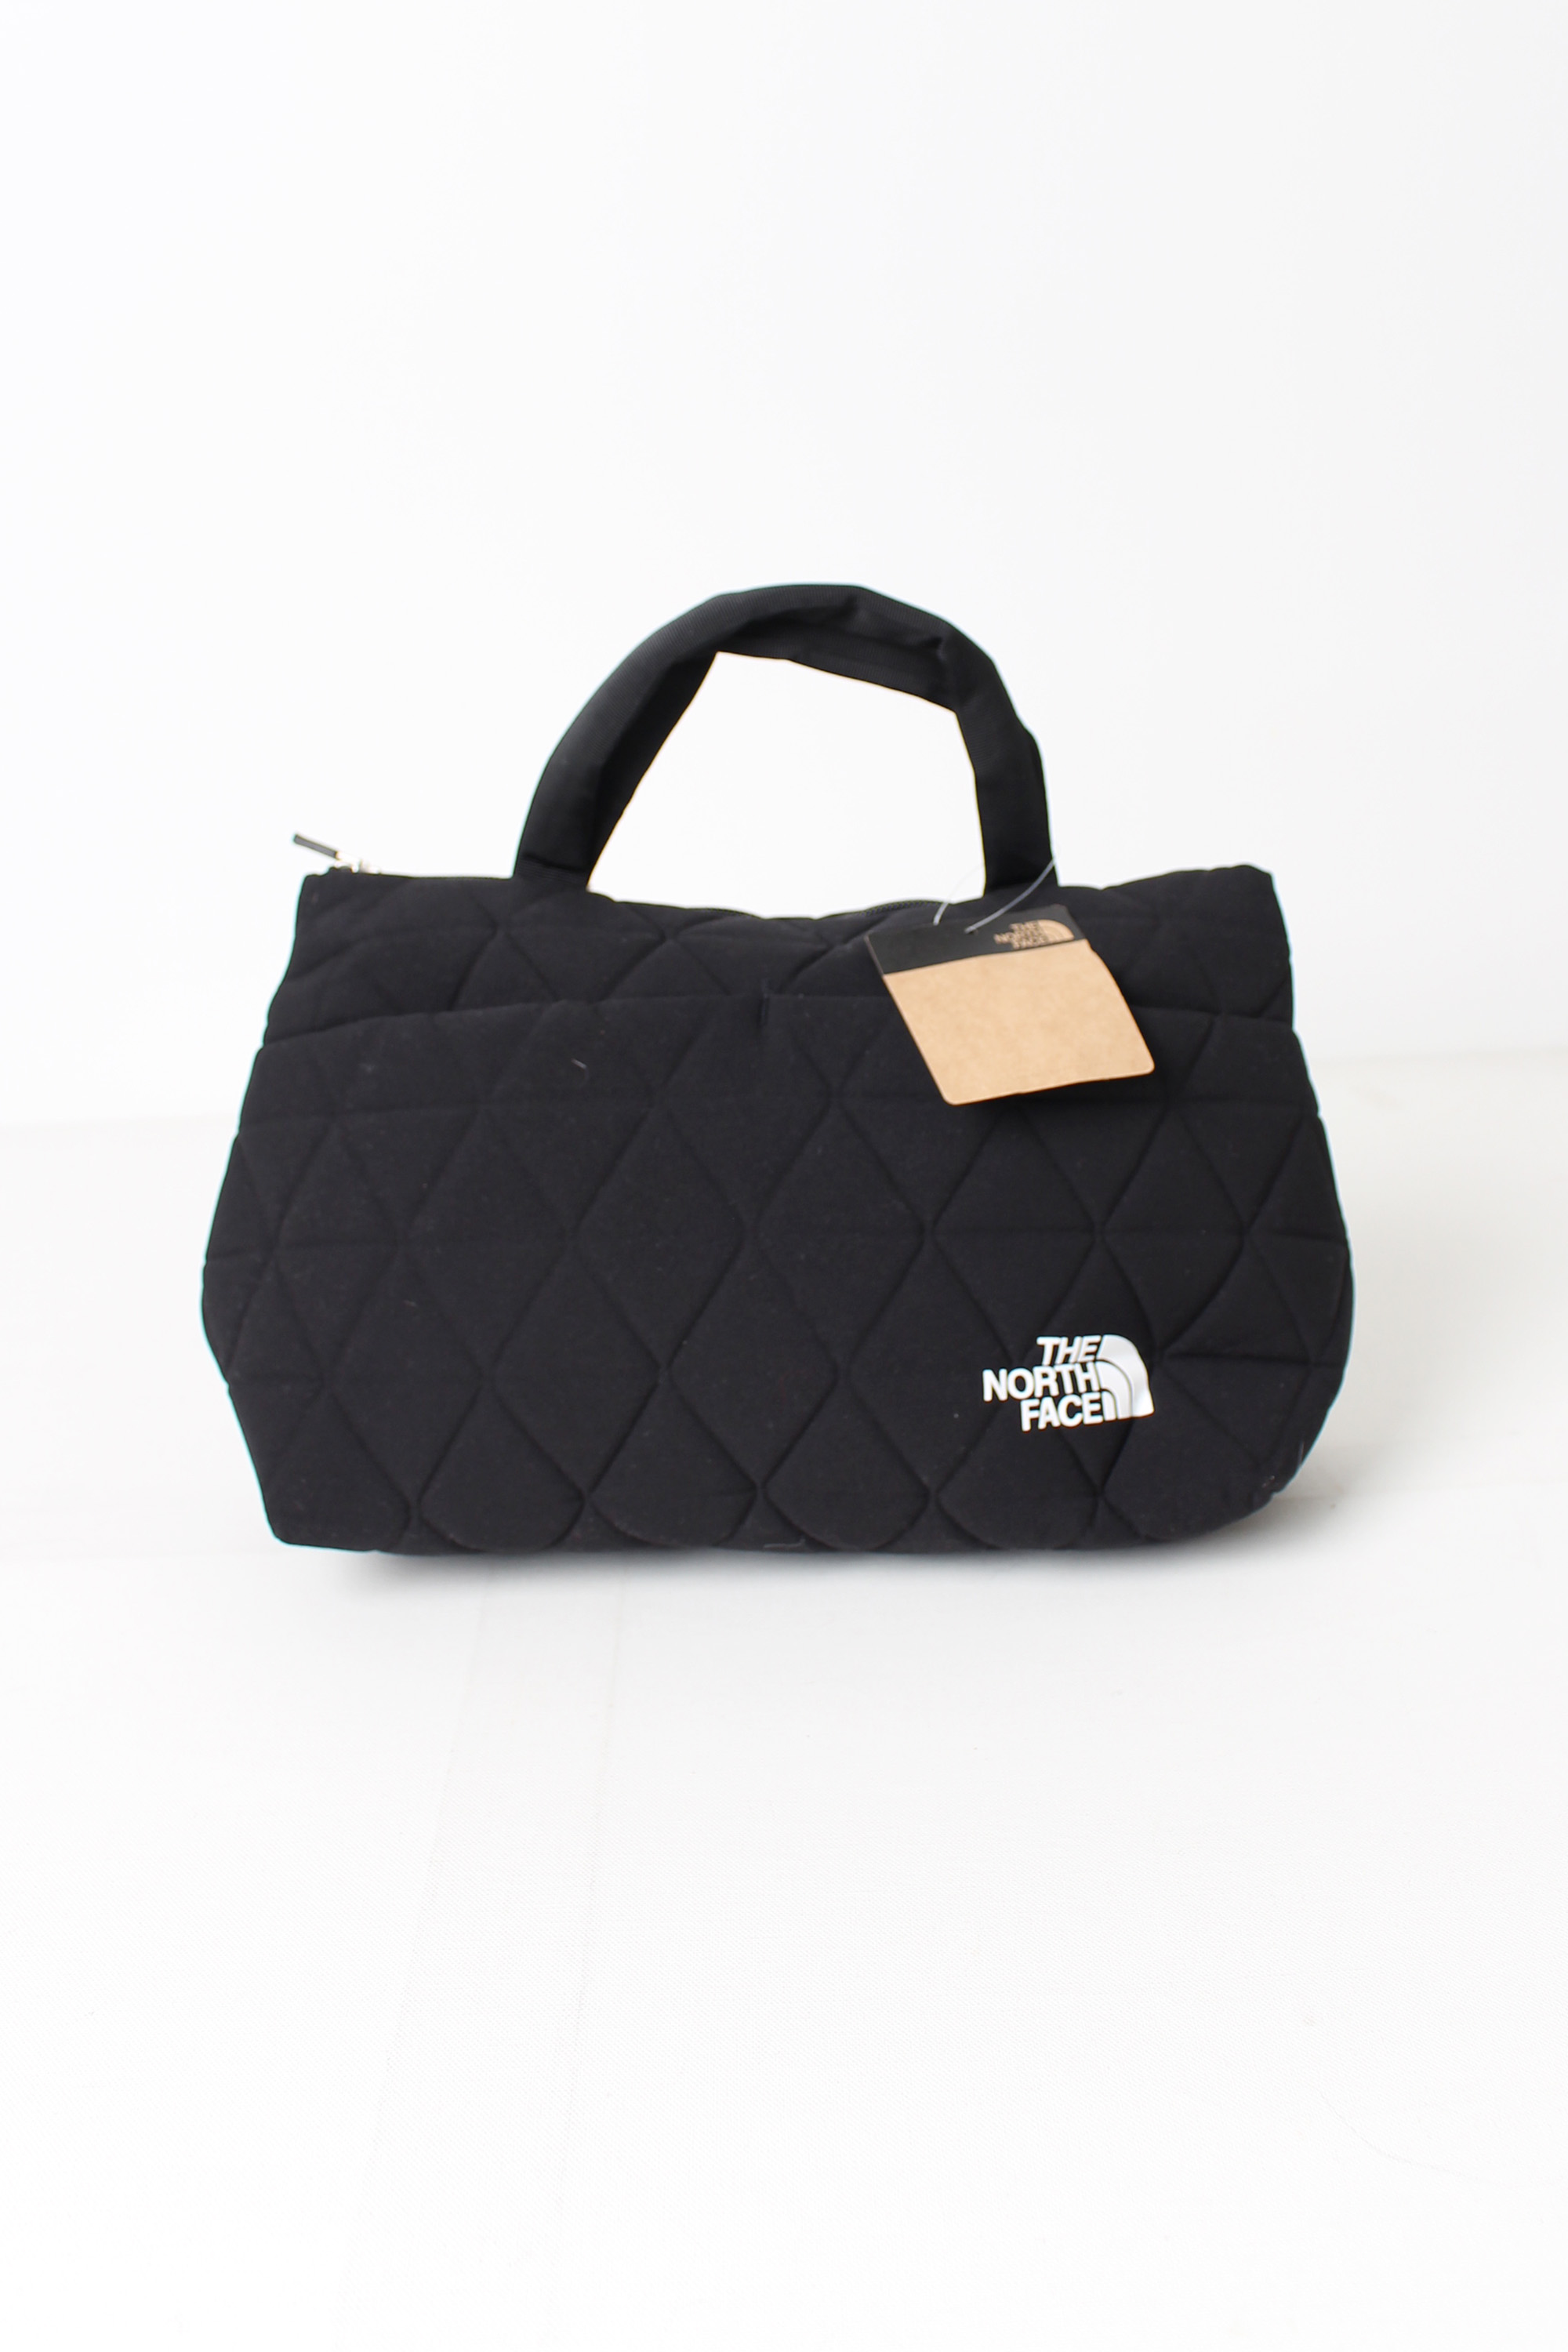 THE NORTH FACE Geoface Box Tote Bag